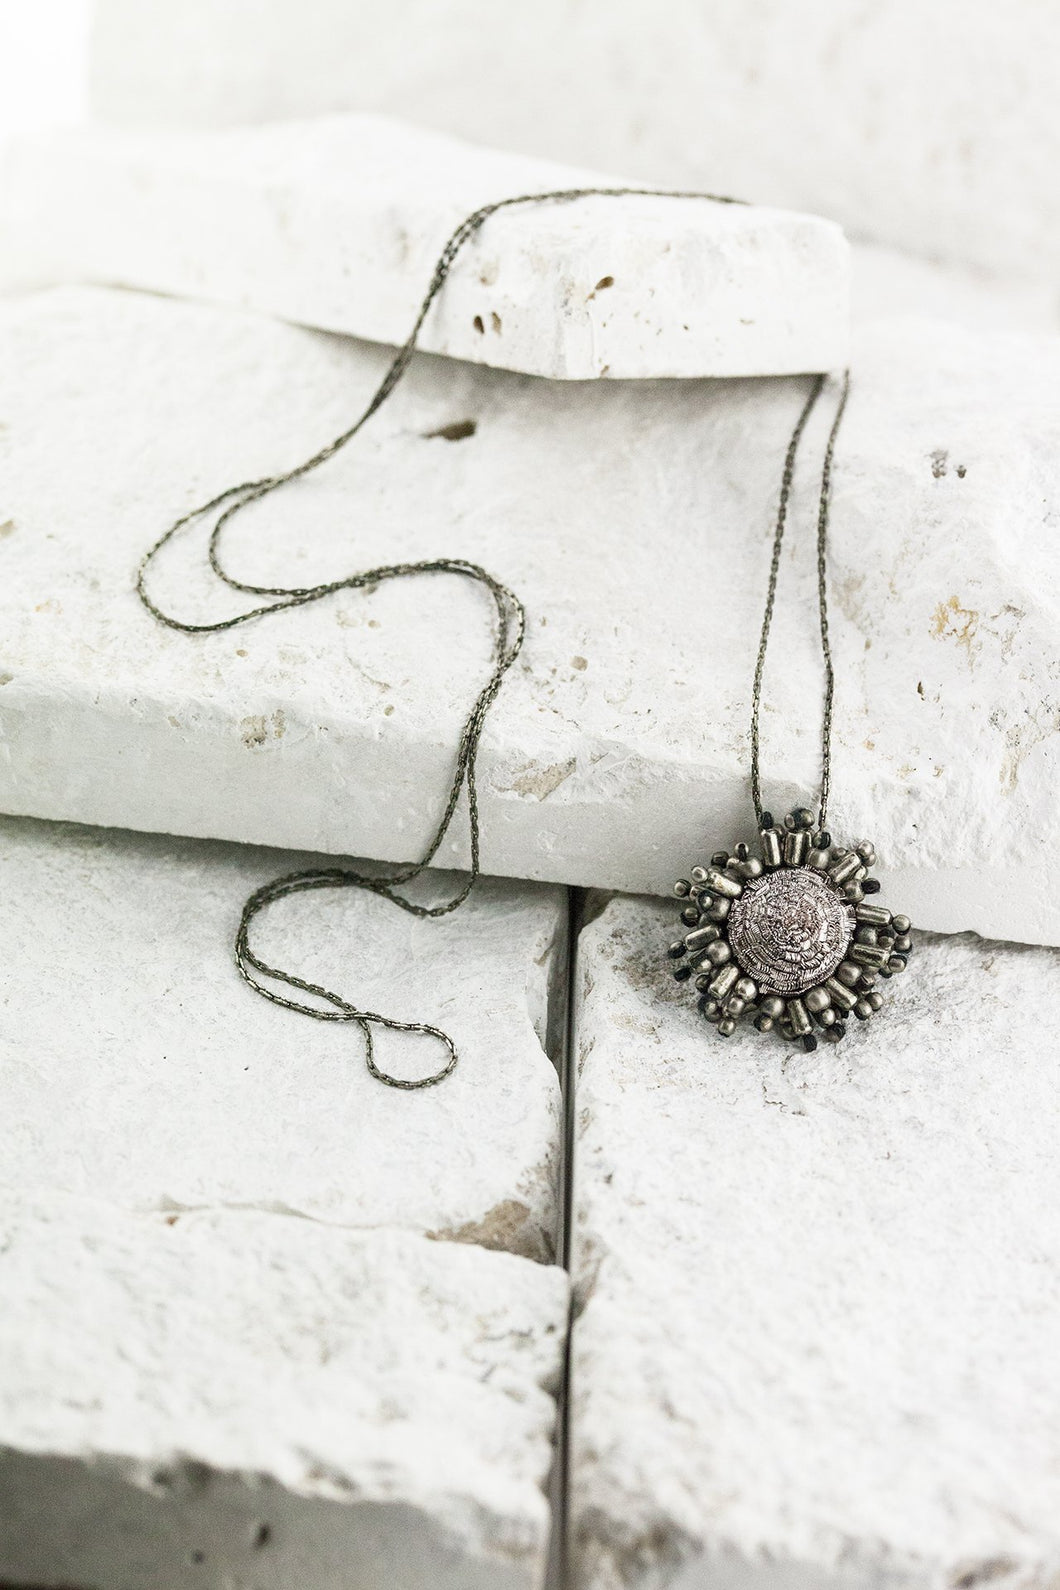 Antique silver necklace|handsewn silver pendant|handmade jewellery|unique long pendant|elegant silver necklace|ethical jewellery|Where The Wilde Things Are